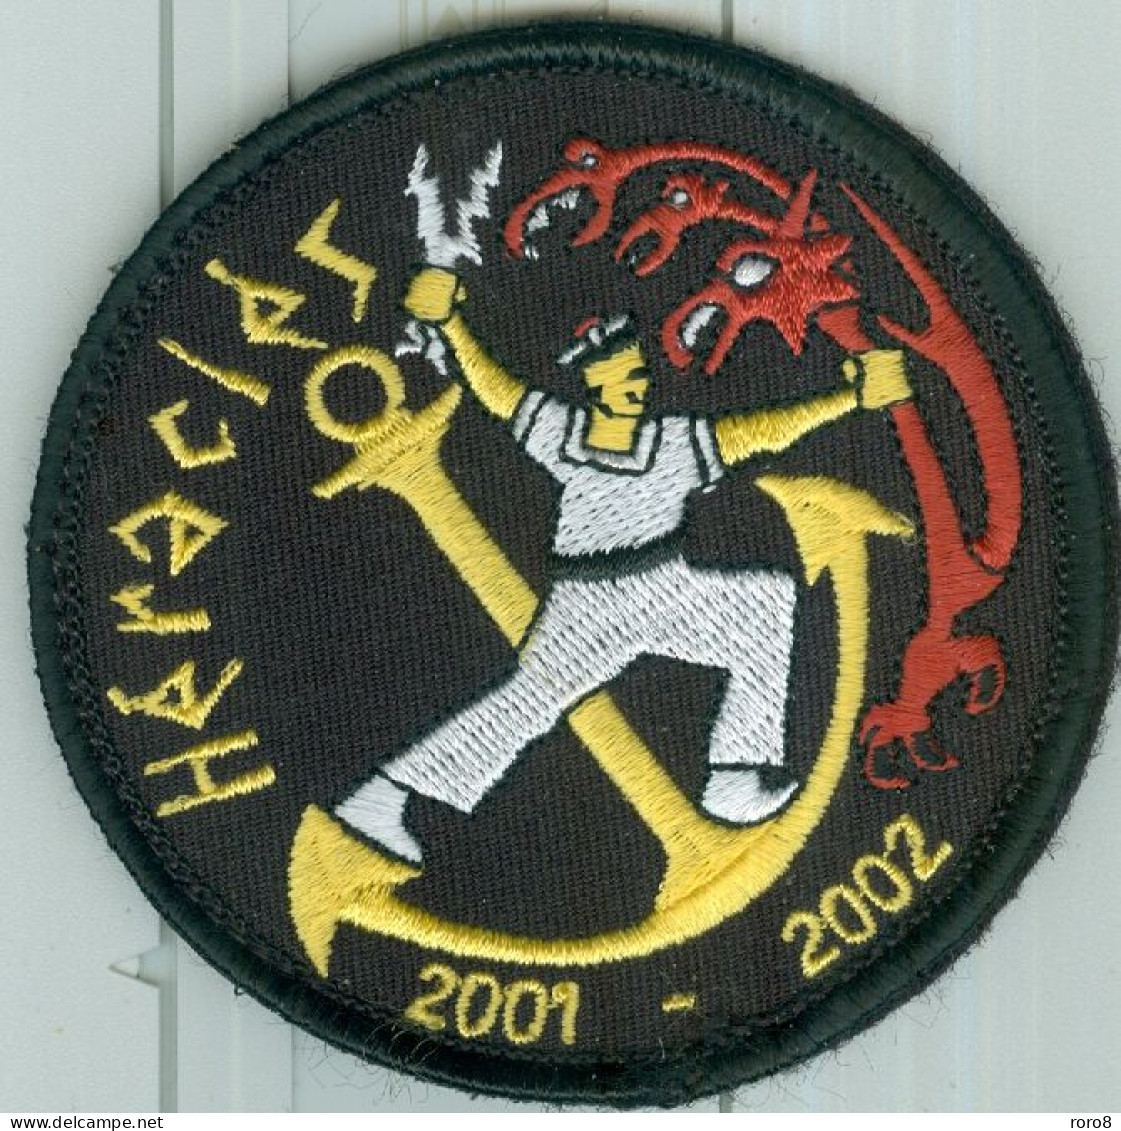 PATCH - MARINE NATIONALE - R91 HERACLES 2001 - 2002 PA CHARLES DE GAULLE. - Blazoenen (textiel)